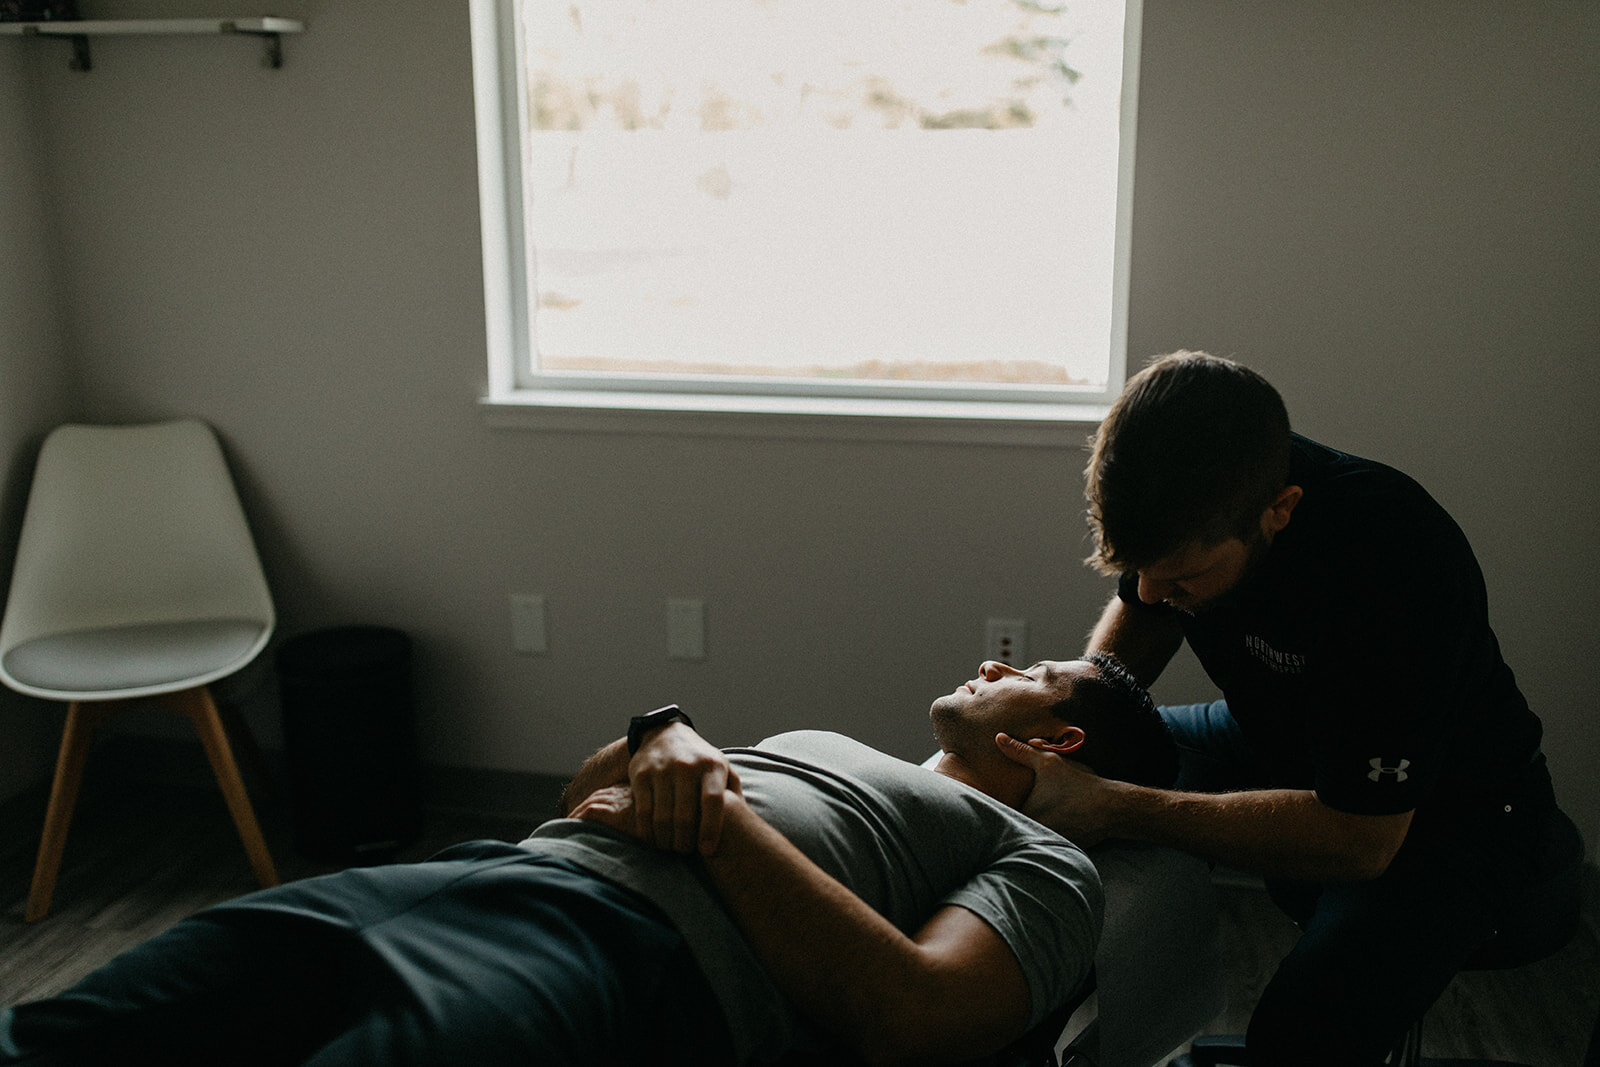 Dr. Trevor Stauber adjusts a patient's neck at his clinic in McMinnville, Oregon.